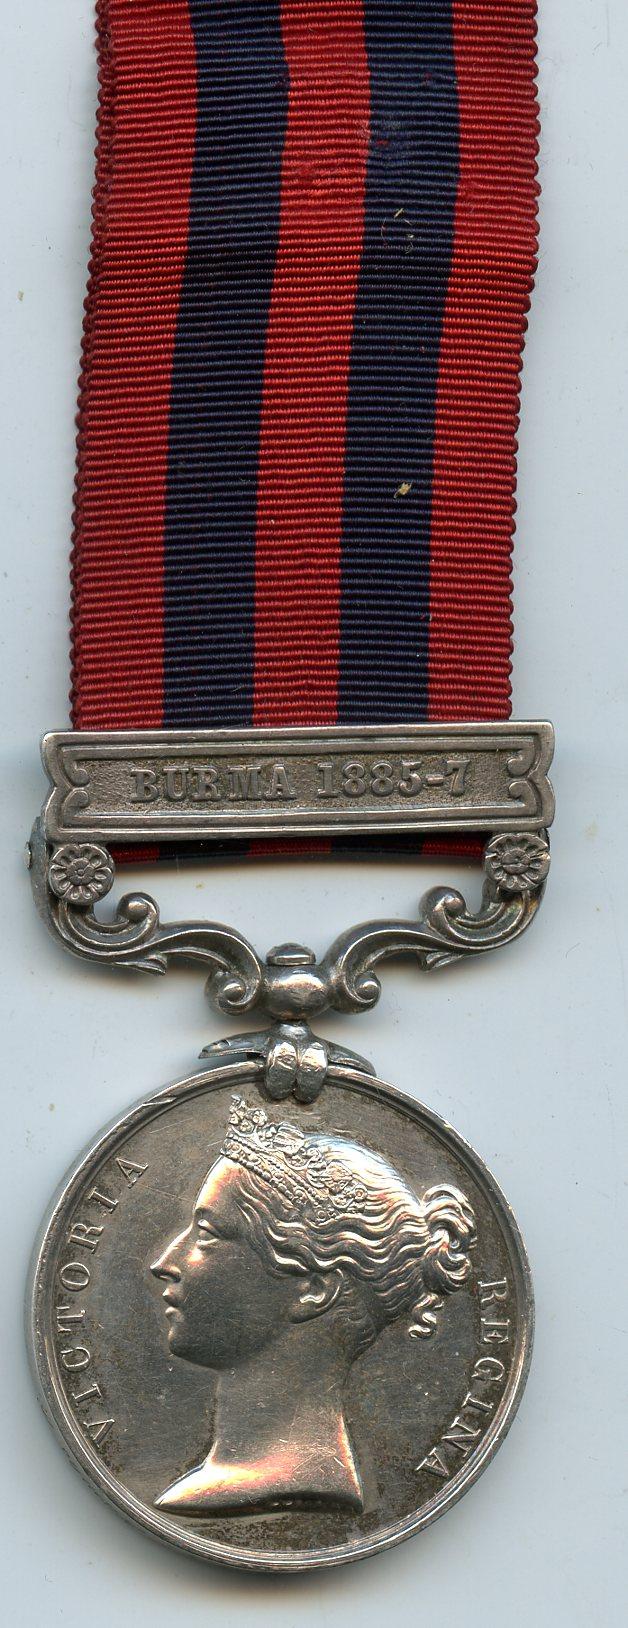 India General Service Medal Burma 1885-87 To Pte C White, Hampshire Regiment